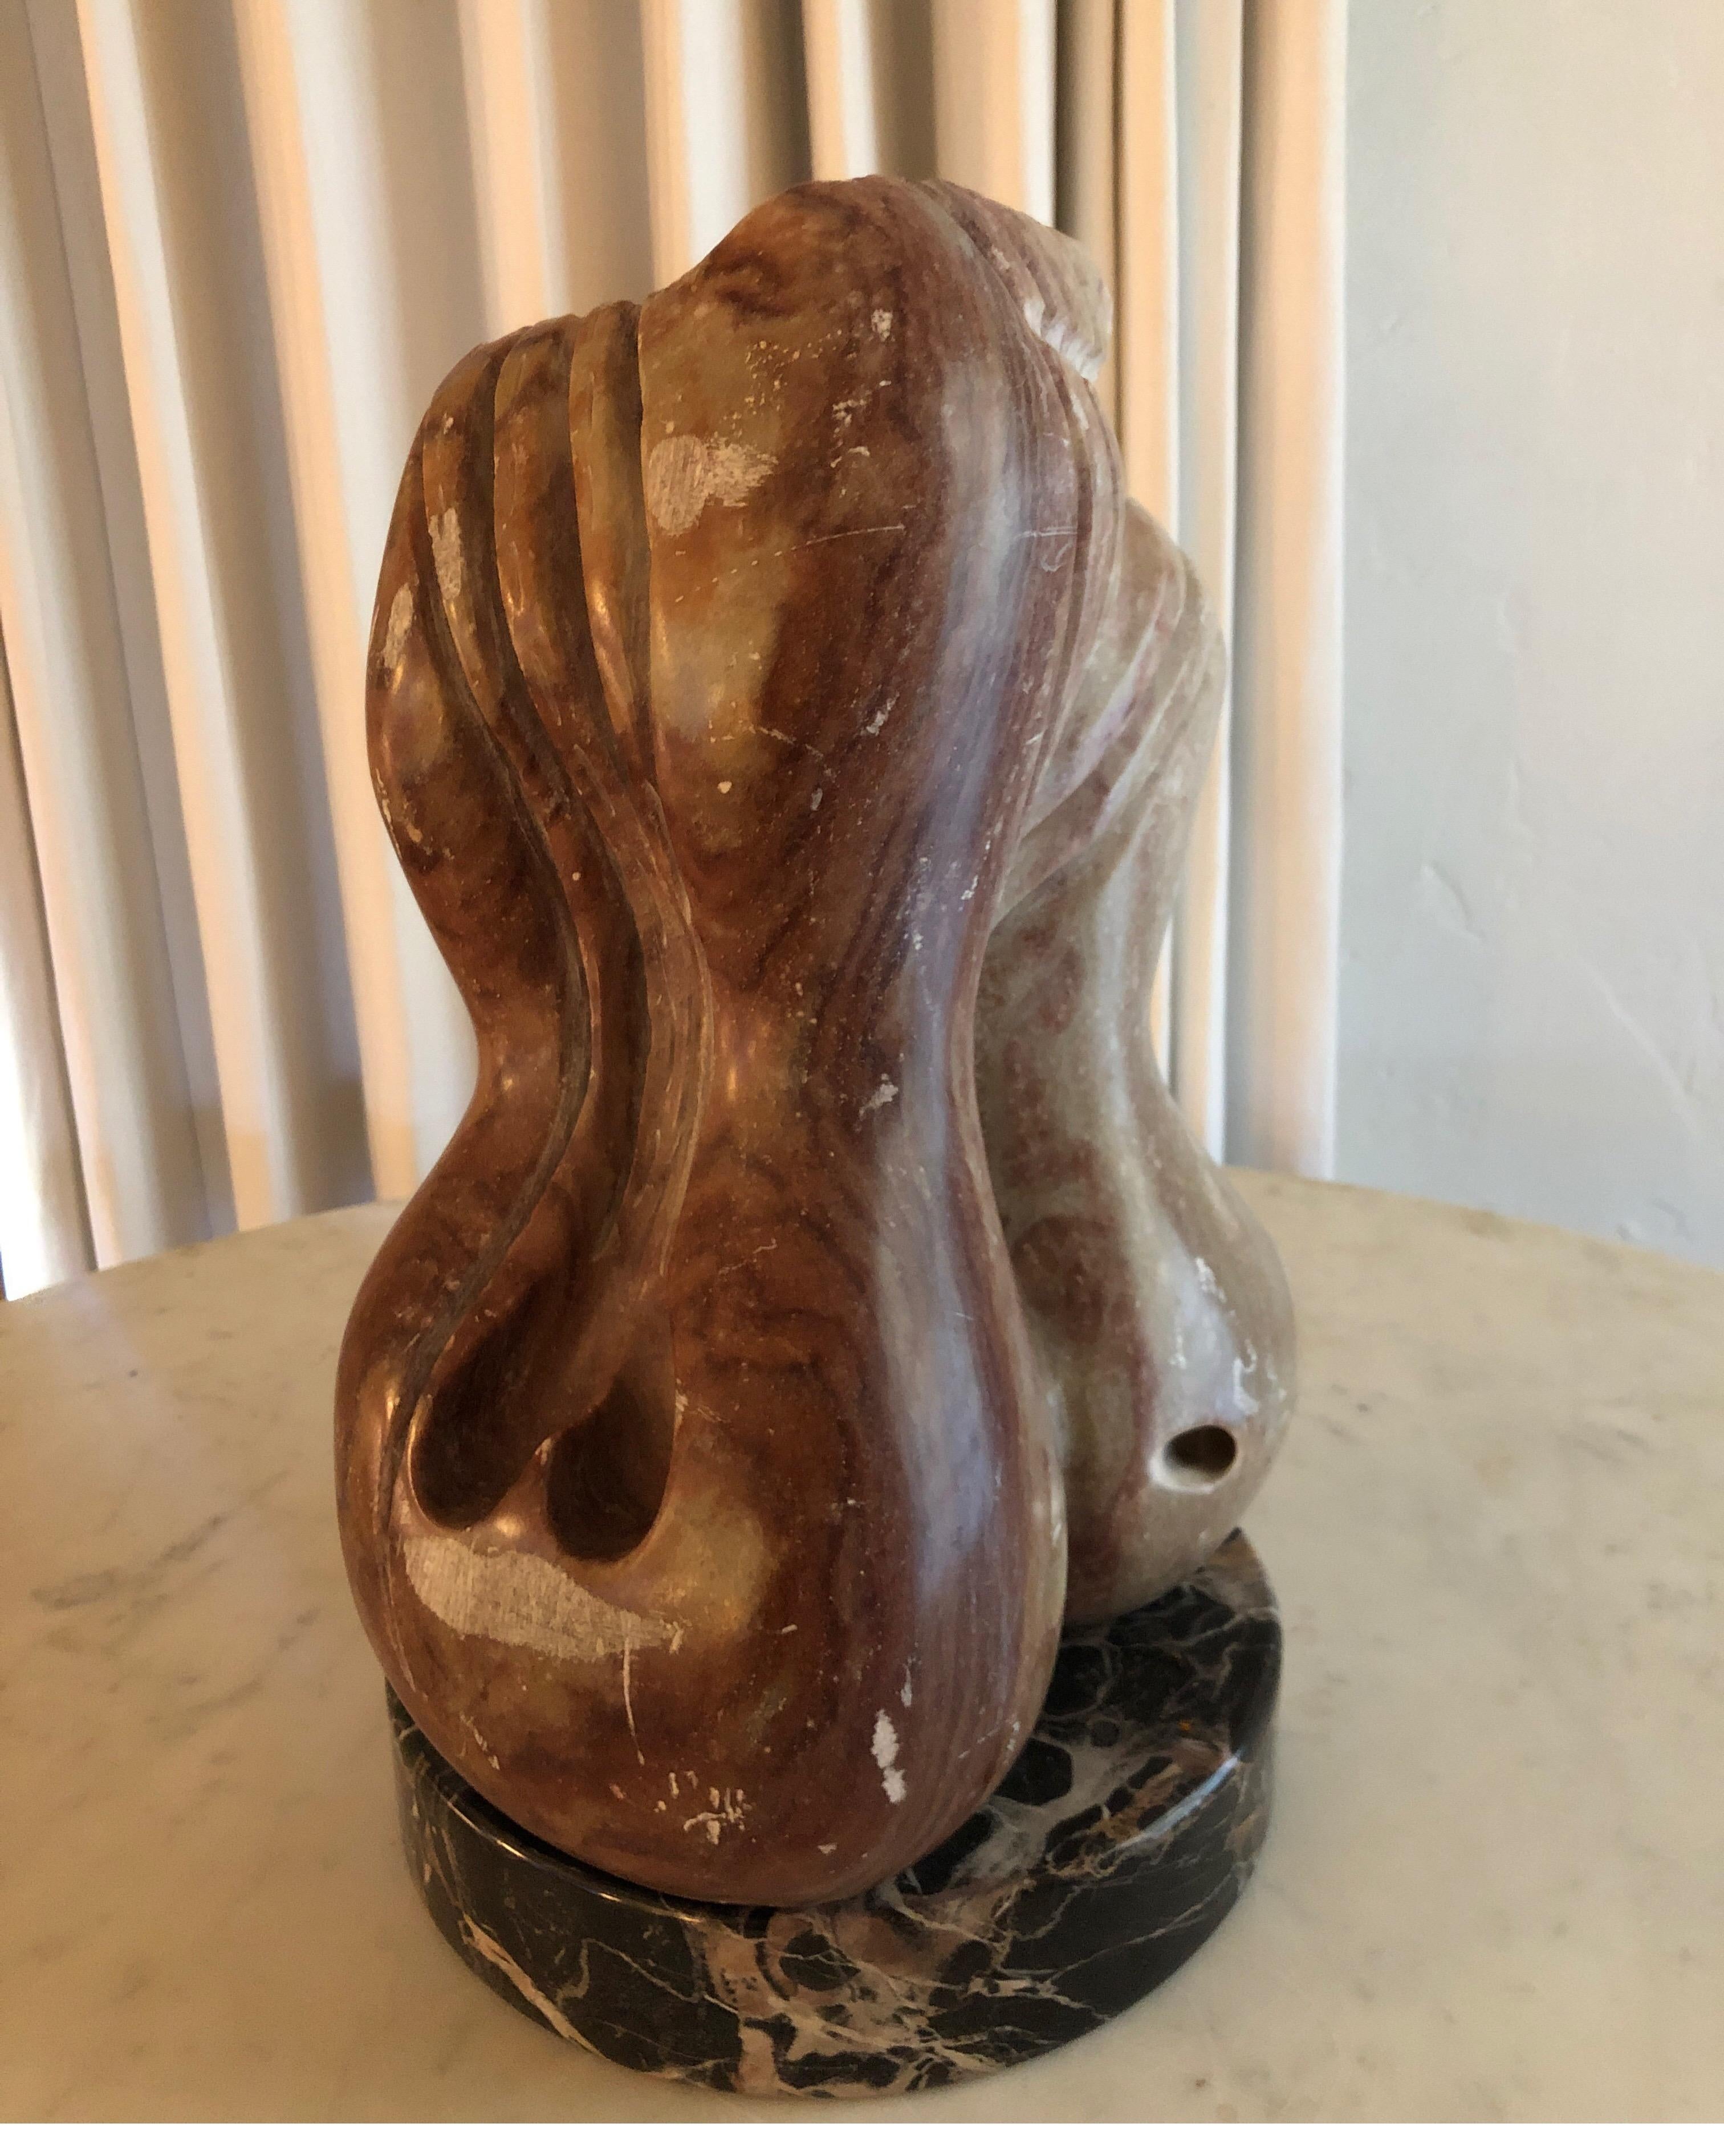 Marble Yehuda Dodd Roth Signed Stone Sculpture, 1980s For Sale